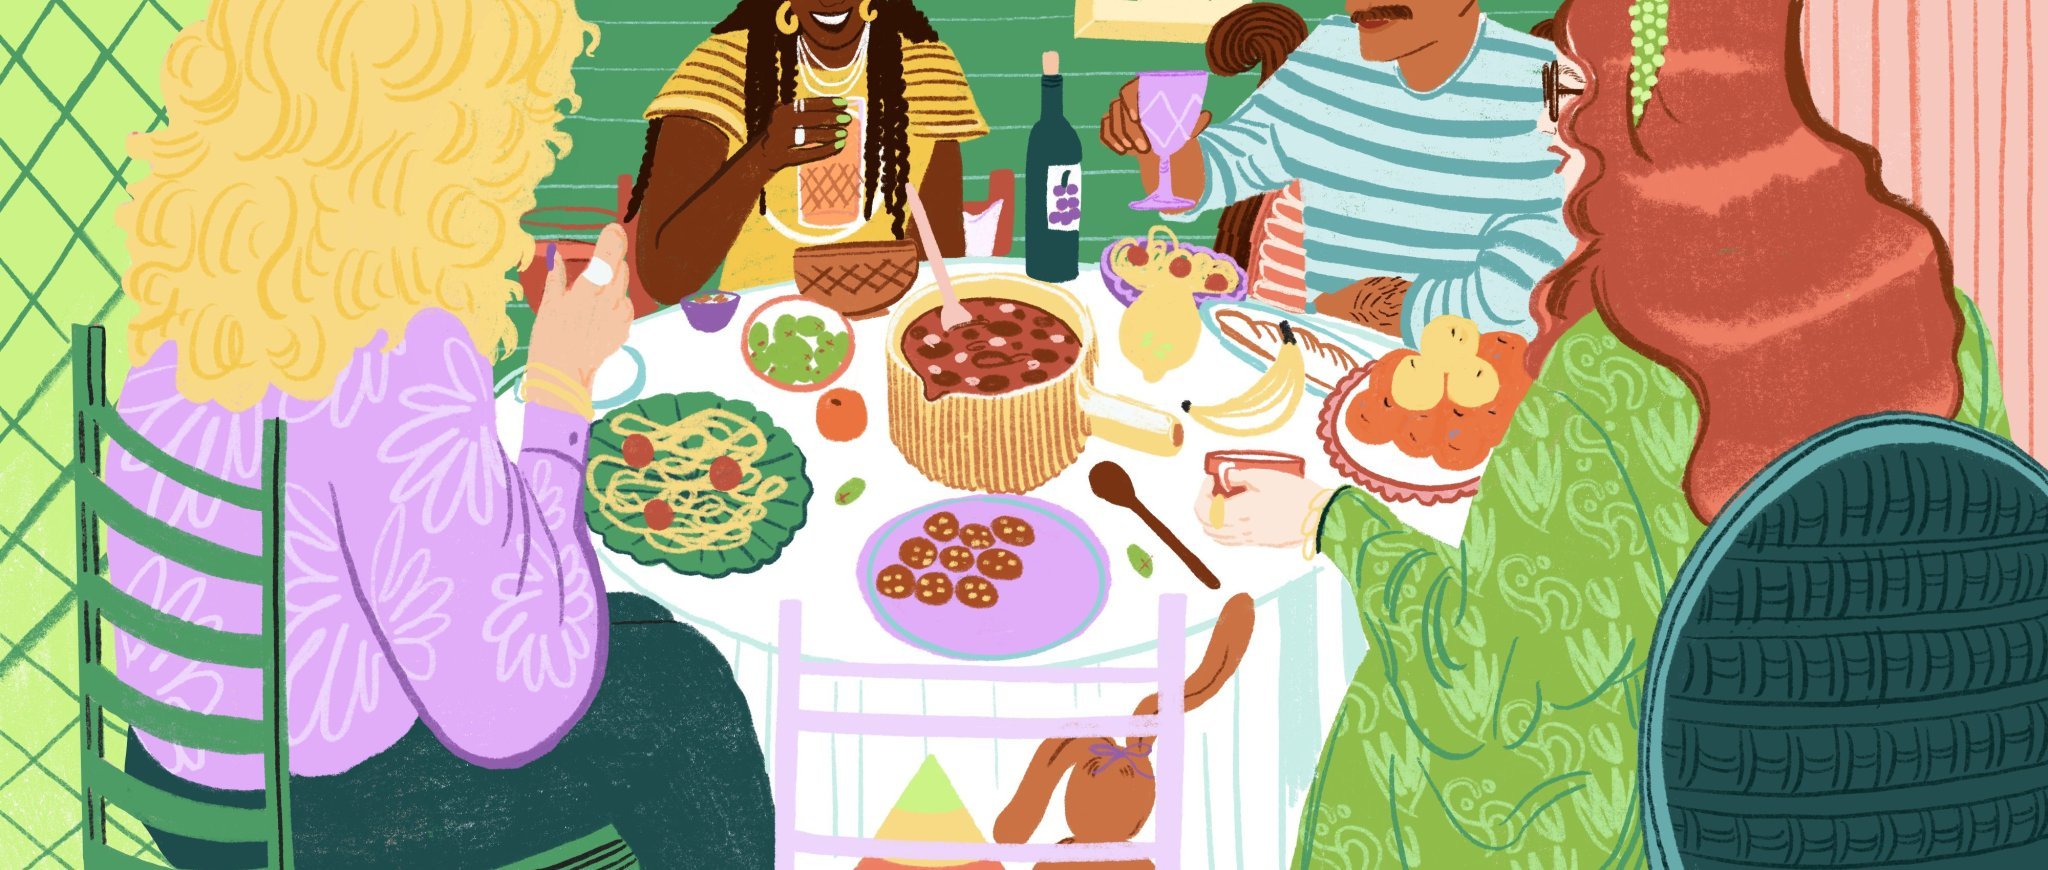 Come On Over: Simply Recipes' Guide to Impromptu Dinner Parties